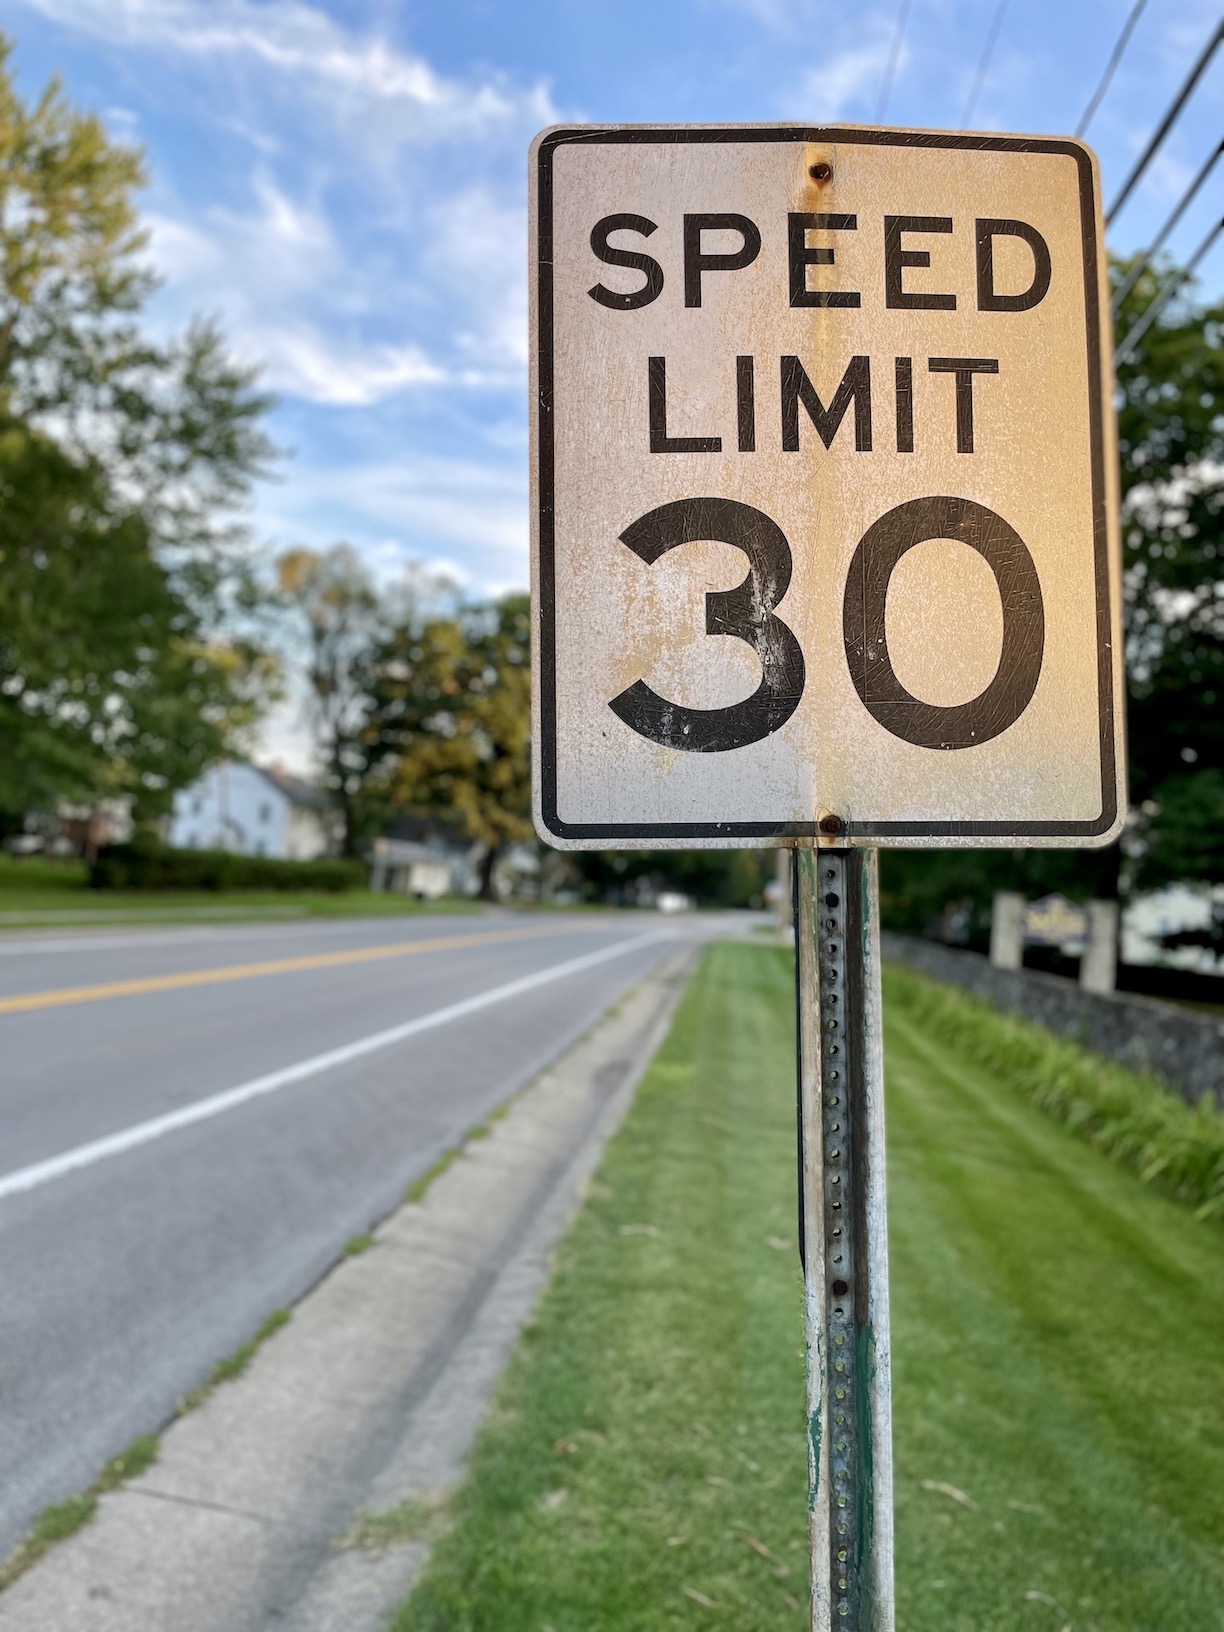 The Village of Lewiston Board of Trustees voted to change the municipal speed limit from 30 miles per hour to 25 mph. No start date has been announced.